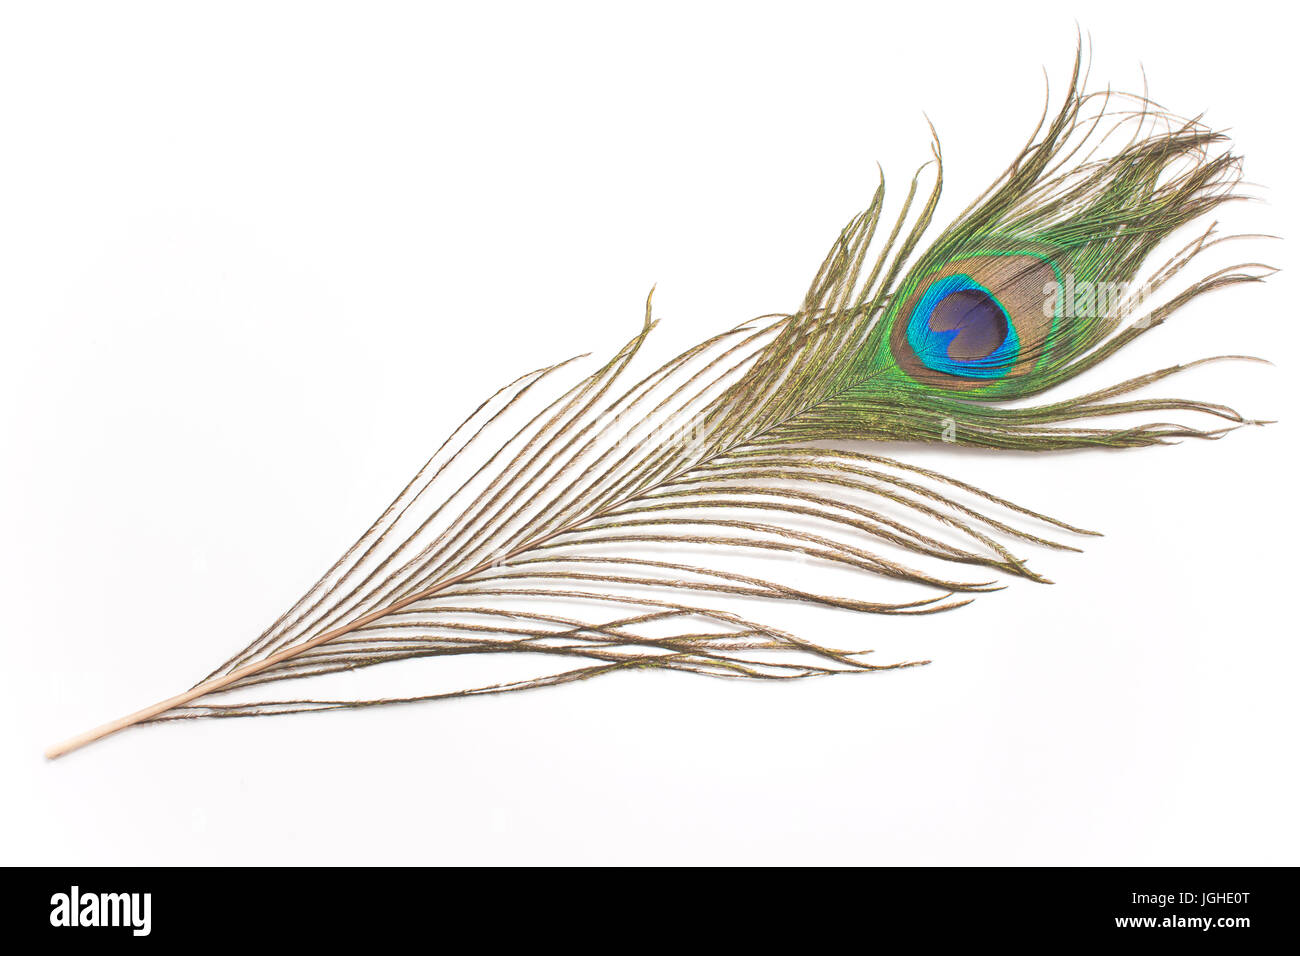 Peacock feather isolated on white Banque D'Images